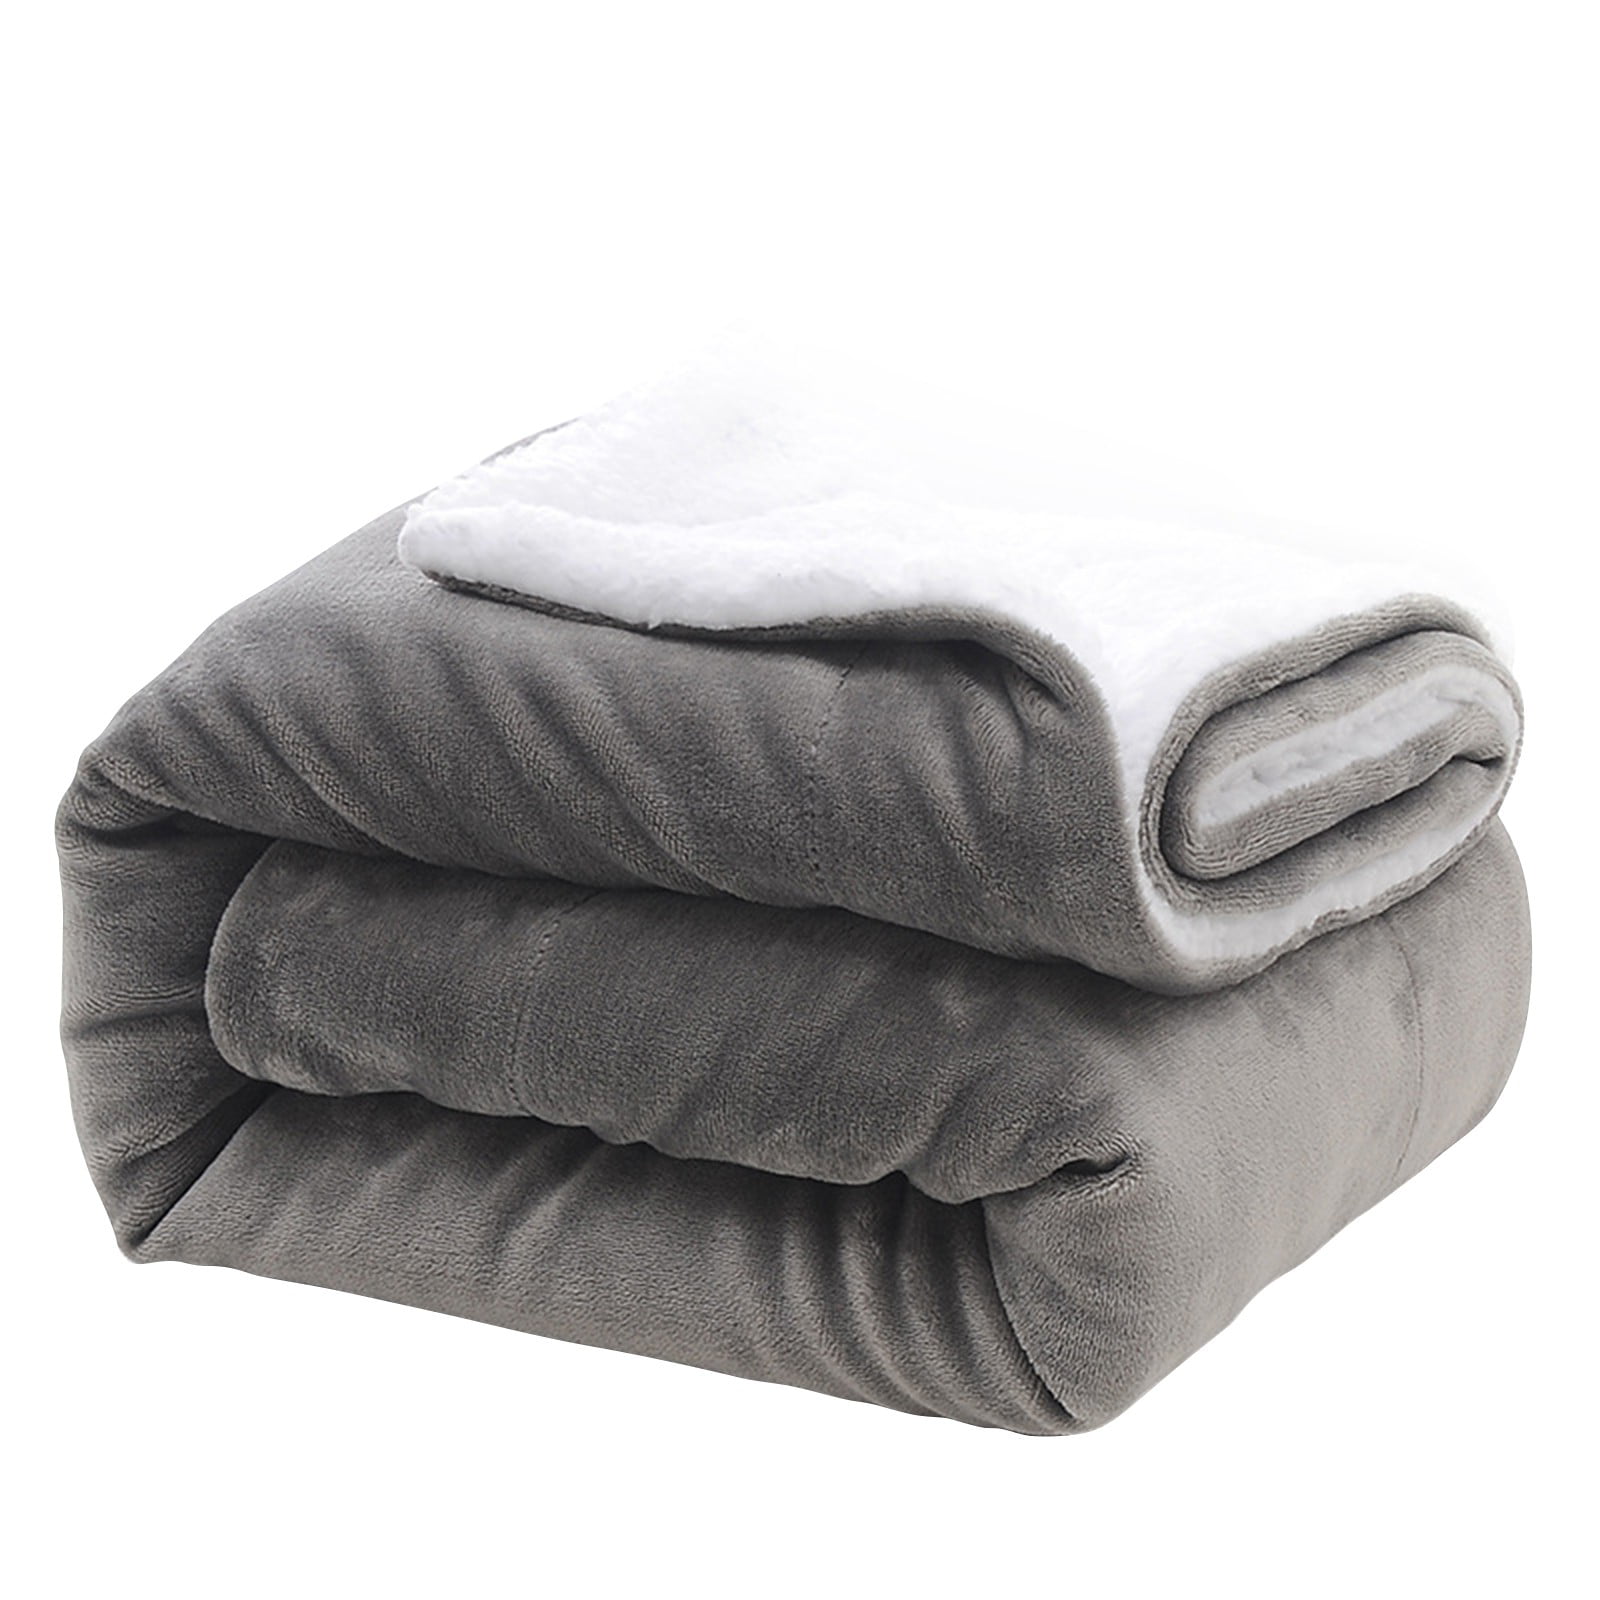 127x152cm, Dark Green GuLL Flannel Blanket Coral Quilts Microfiber Luxurious Soft Comfortable Throw Blanket Fleece Plush Suitable for Nap Air Conditioning Room Bed Sofa Car or Travel 